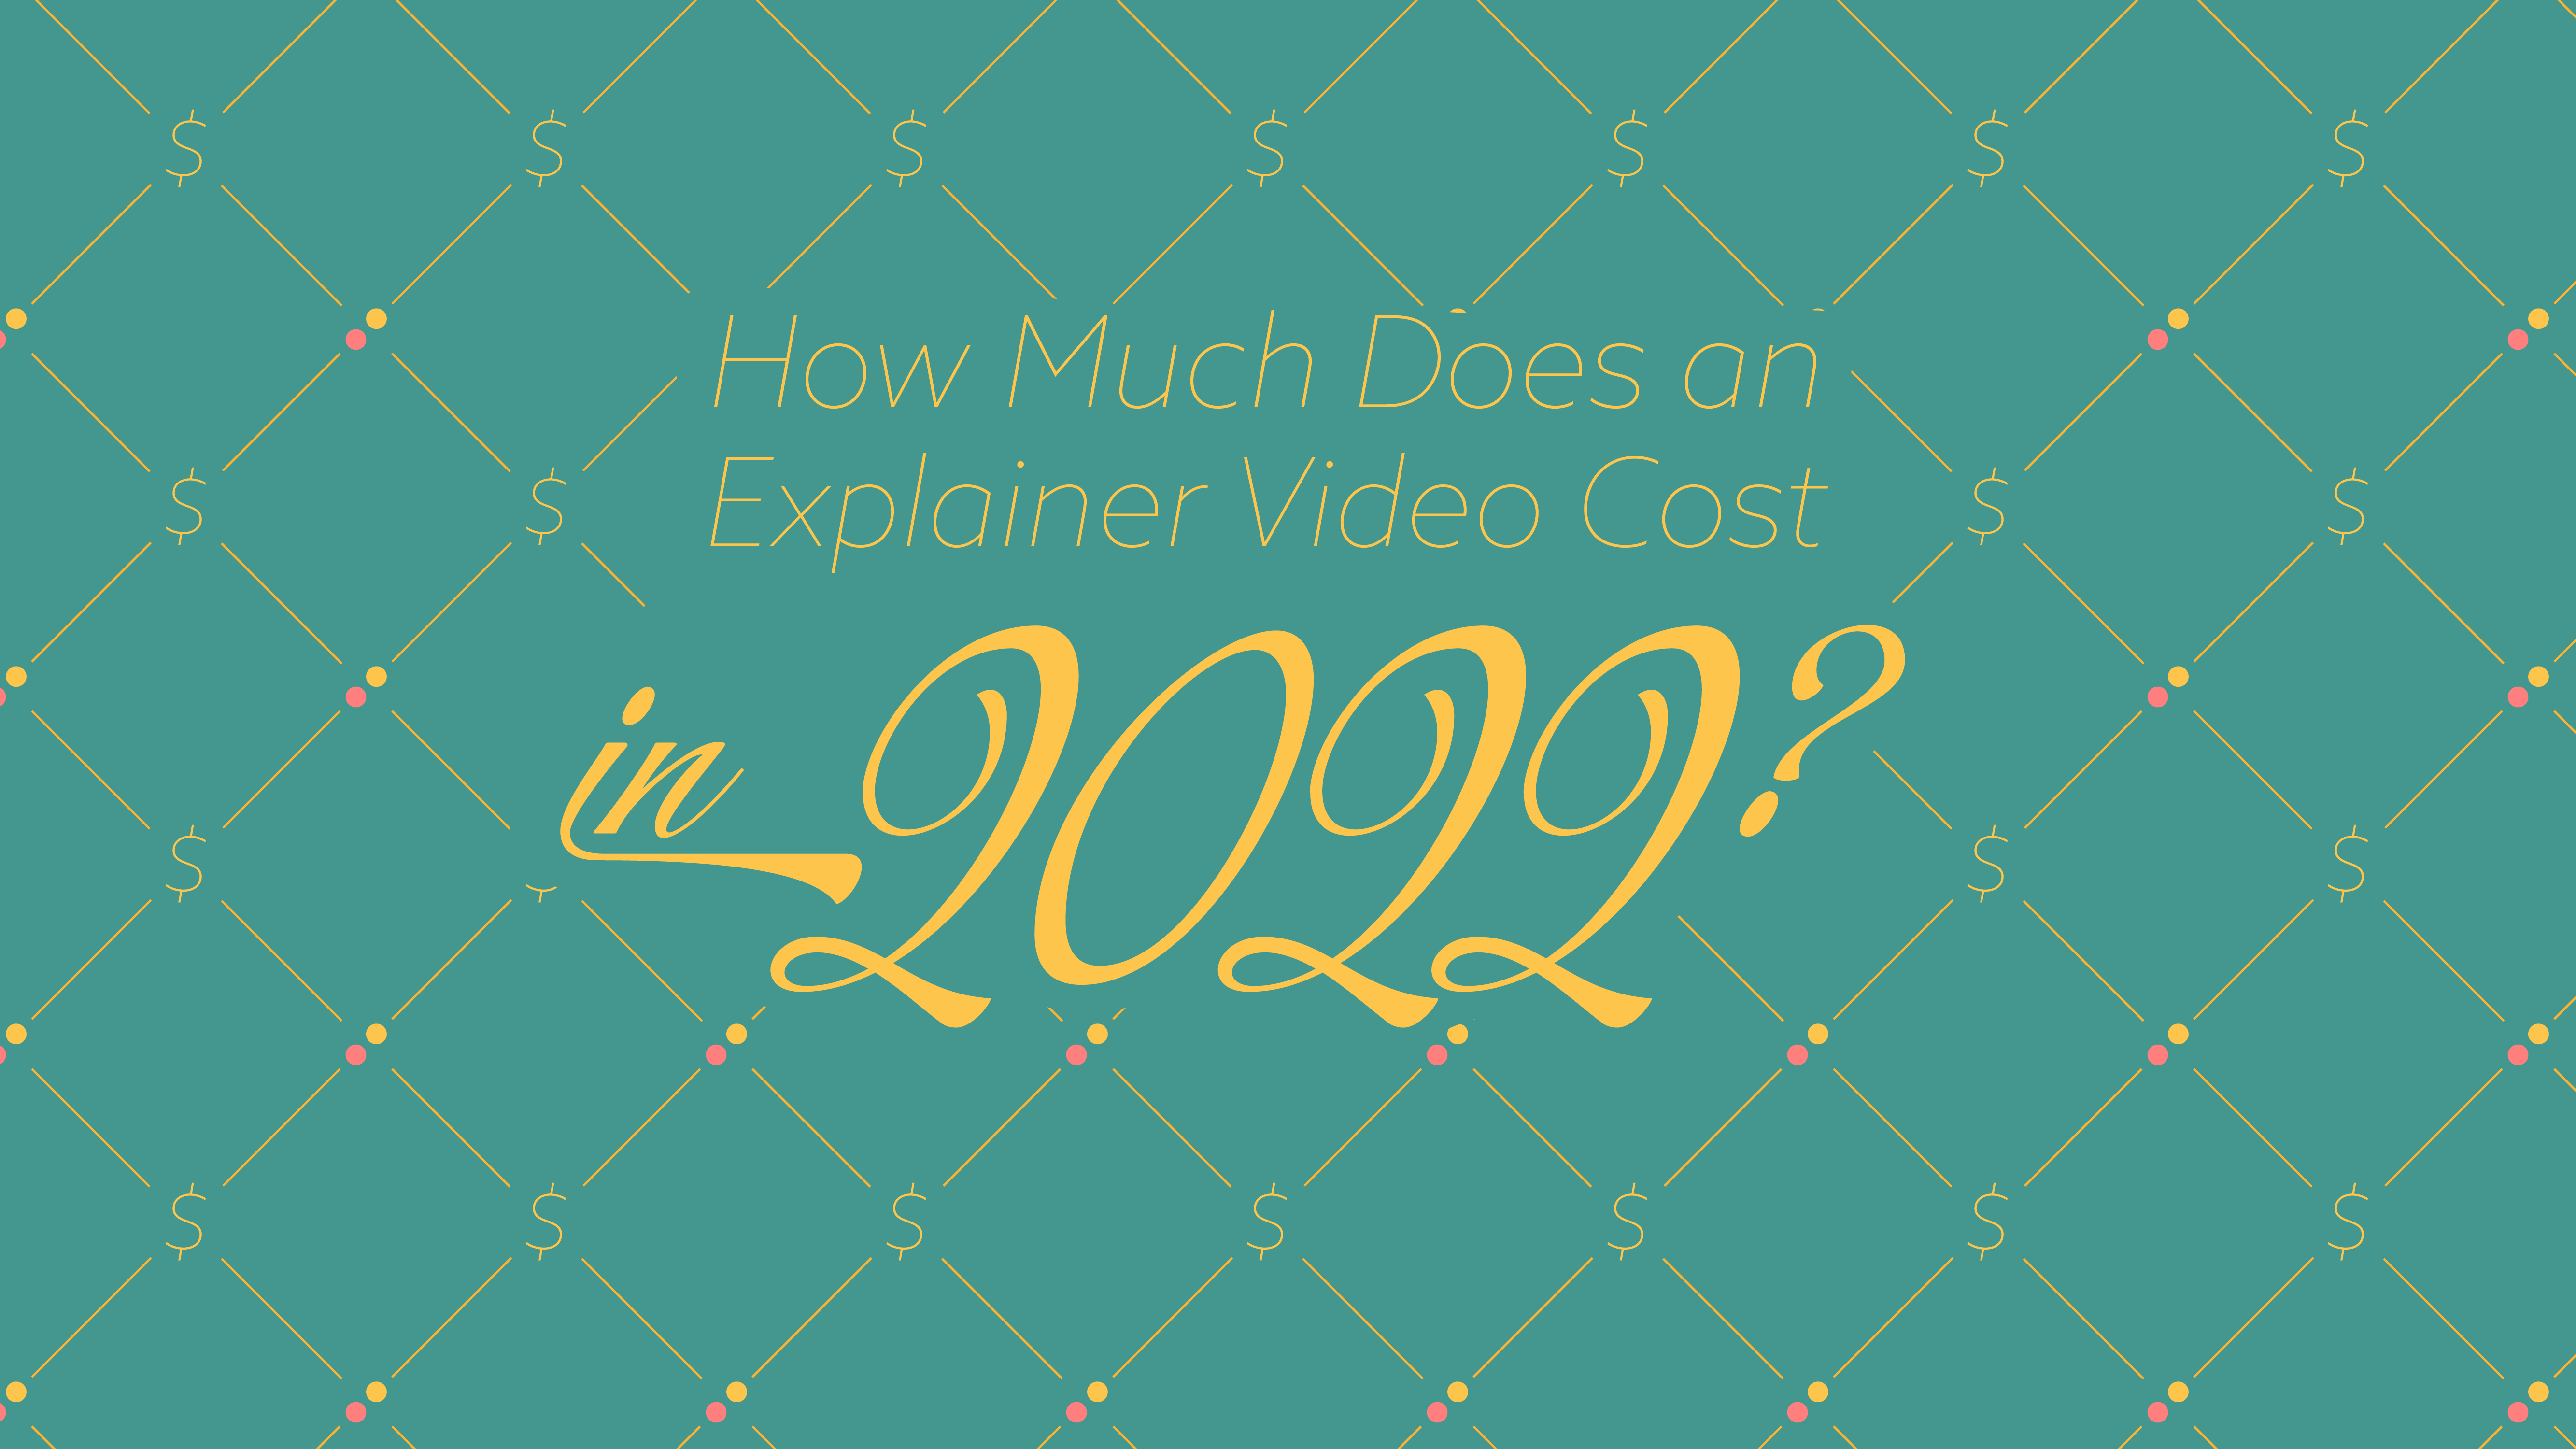 Turquoise background with gold detailing, made up of polka dots and dollar signs; title image reads 'How Much does an Animated Explainer Video Cost in 2022?"